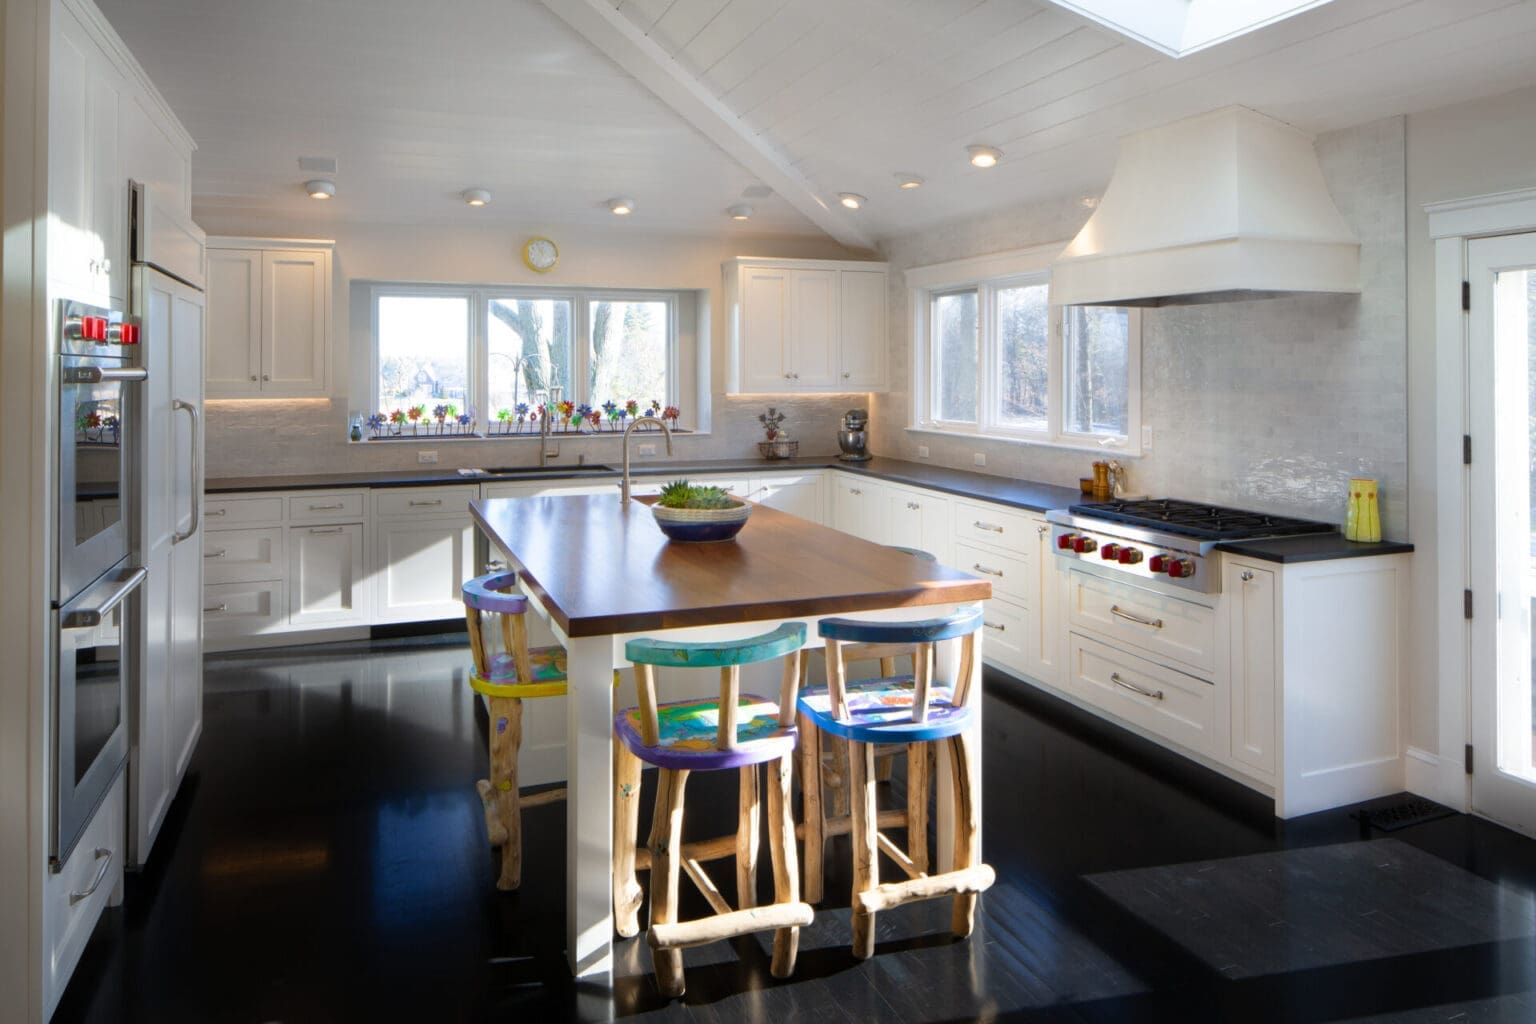 A photo of a large kitchen with white shaker-style cabinetry and black countertops. An island with a wood countertop and a secondary sink is in the middle of the kitchen, surrounded by four brightly painted wooden chairs.